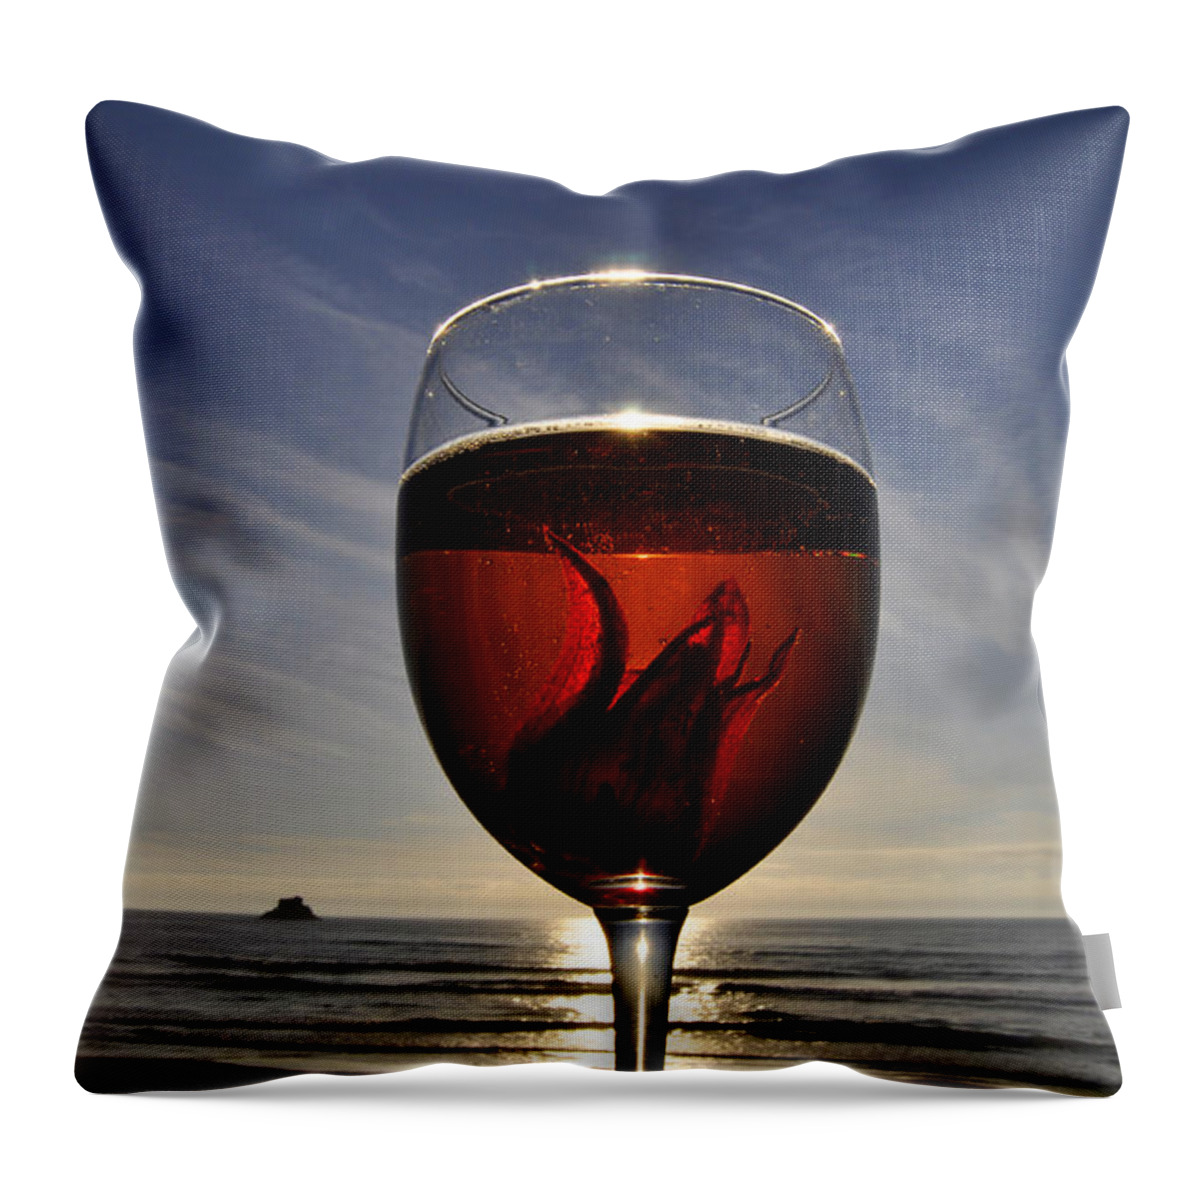 Bokeh Throw Pillow featuring the photograph Hibiscus Flower Sunset by Pelo Blanco Photo